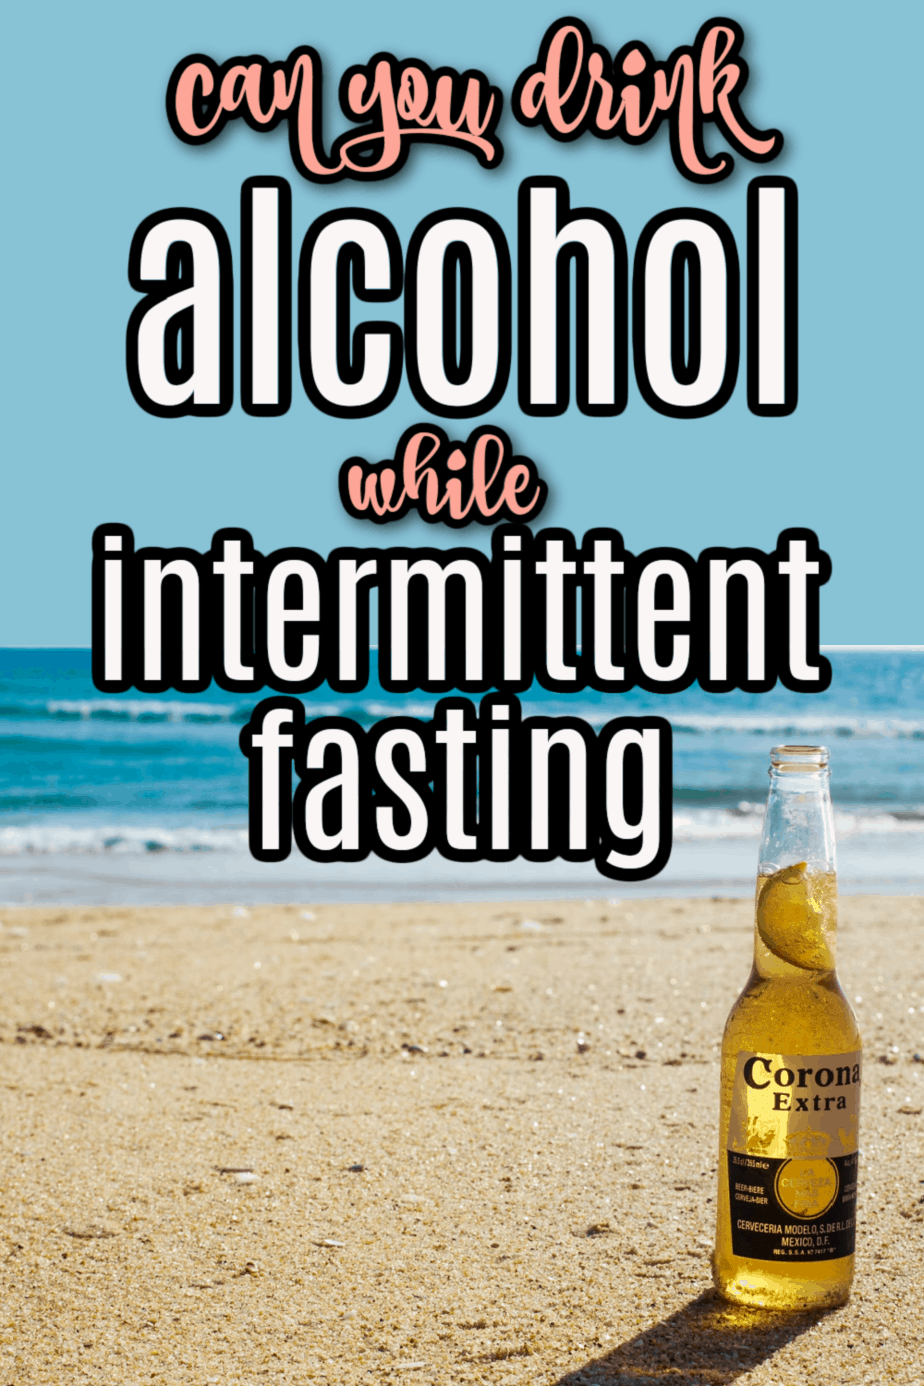 Intermittent Fasting and Alcohol